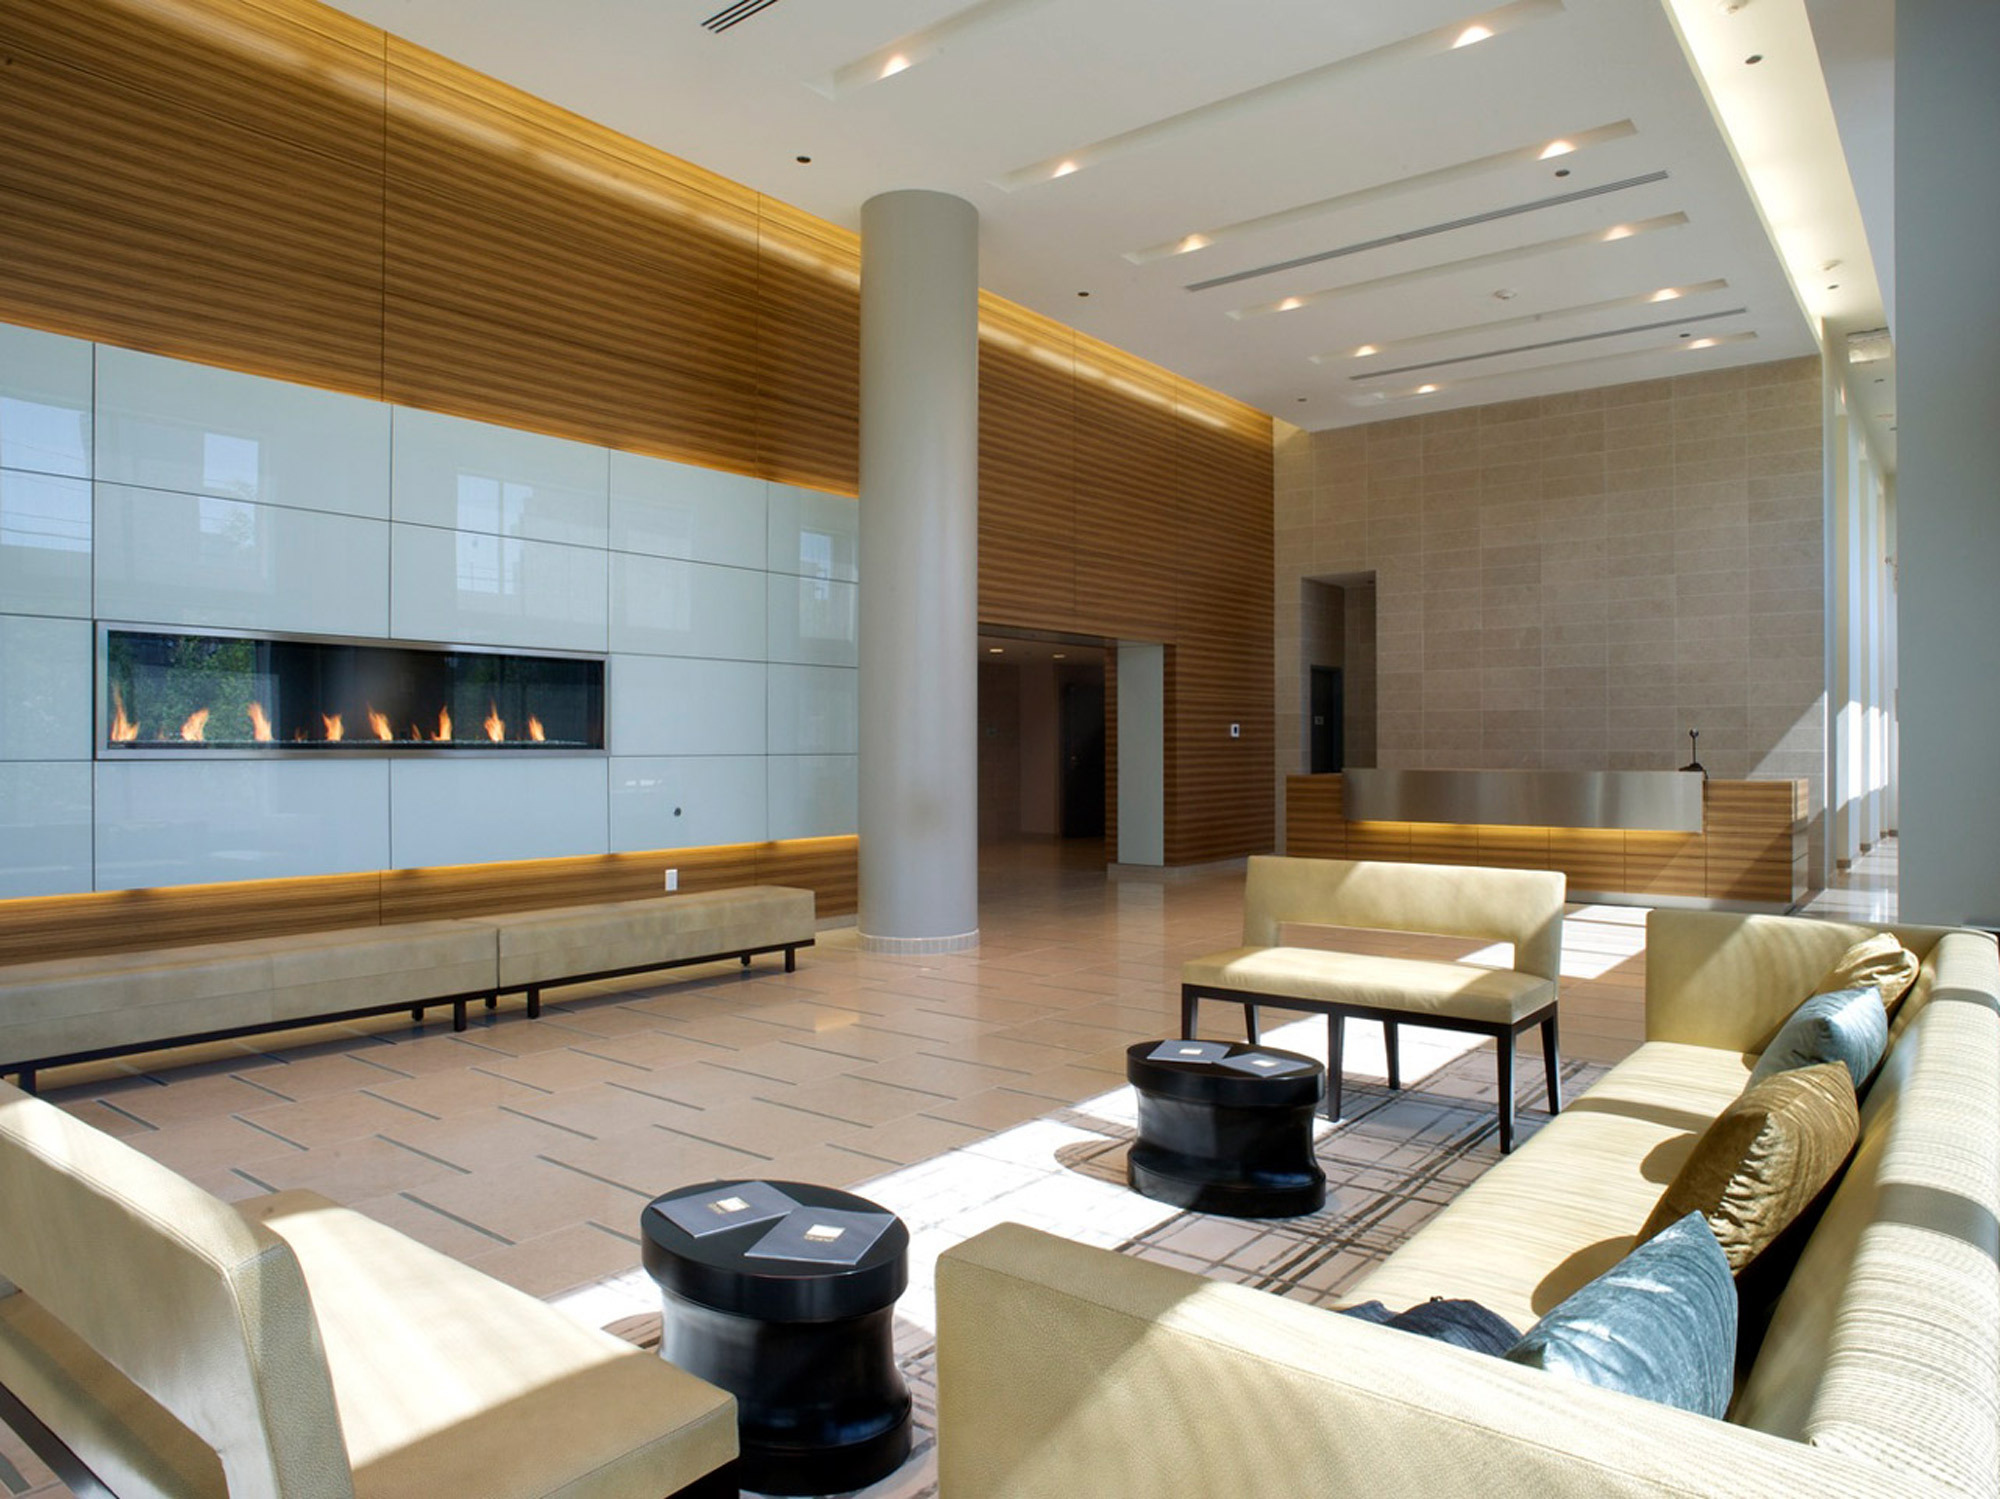 Spacious lobby with floor-to-ceiling windows allowing natural light to accentuate the warm wooden wall panels. A modern fireplace serves as a focal point, flanked by low-profile seating arrangements featuring clean lines and neutral tones, harmonizing with the minimalist aesthetic.